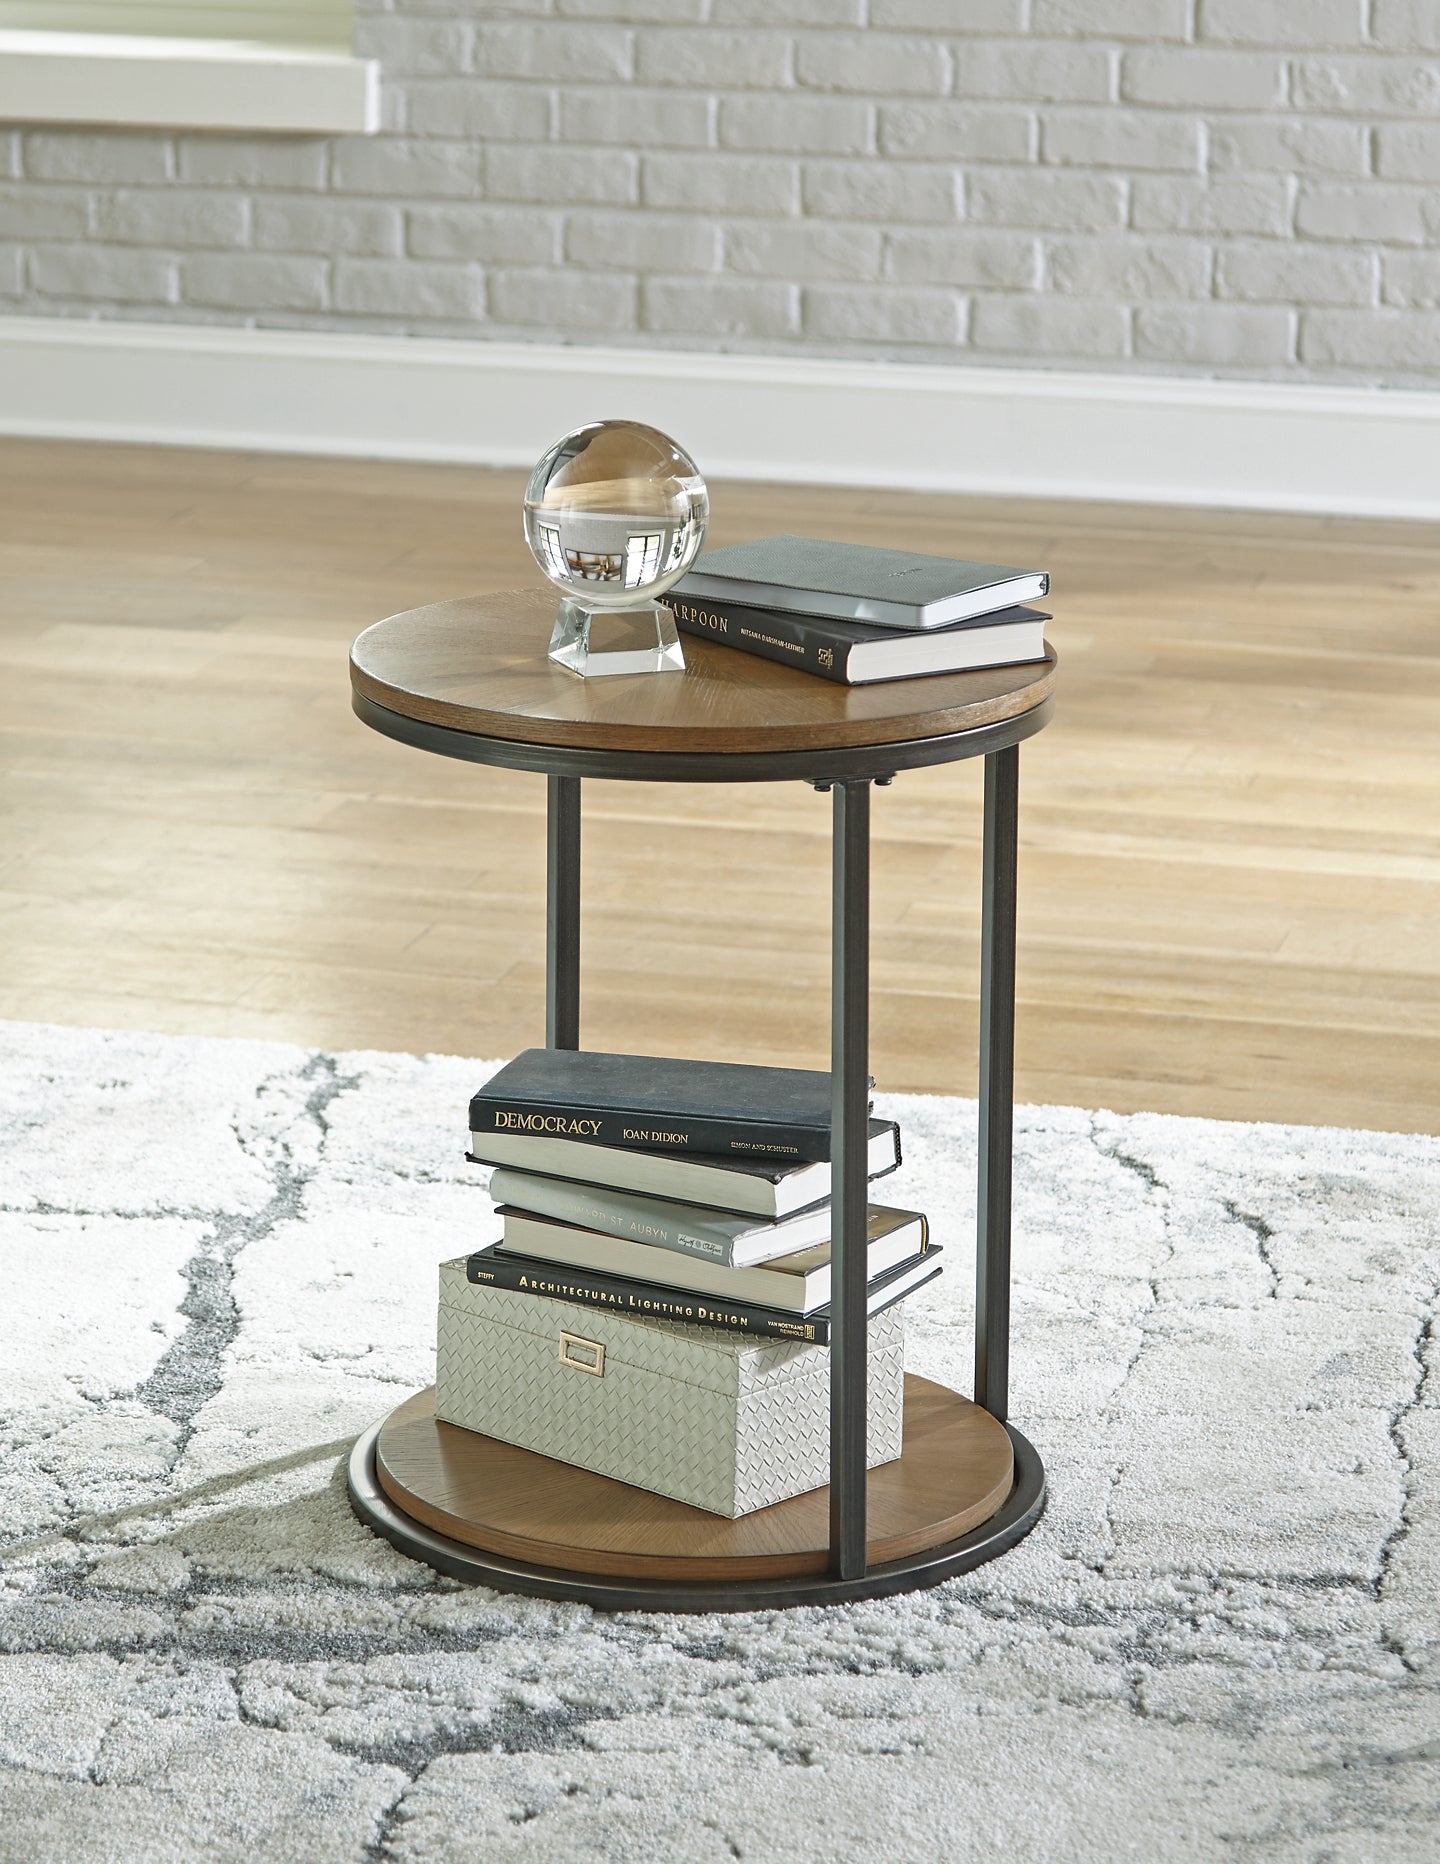 Ashley Express - Fridley Round End Table